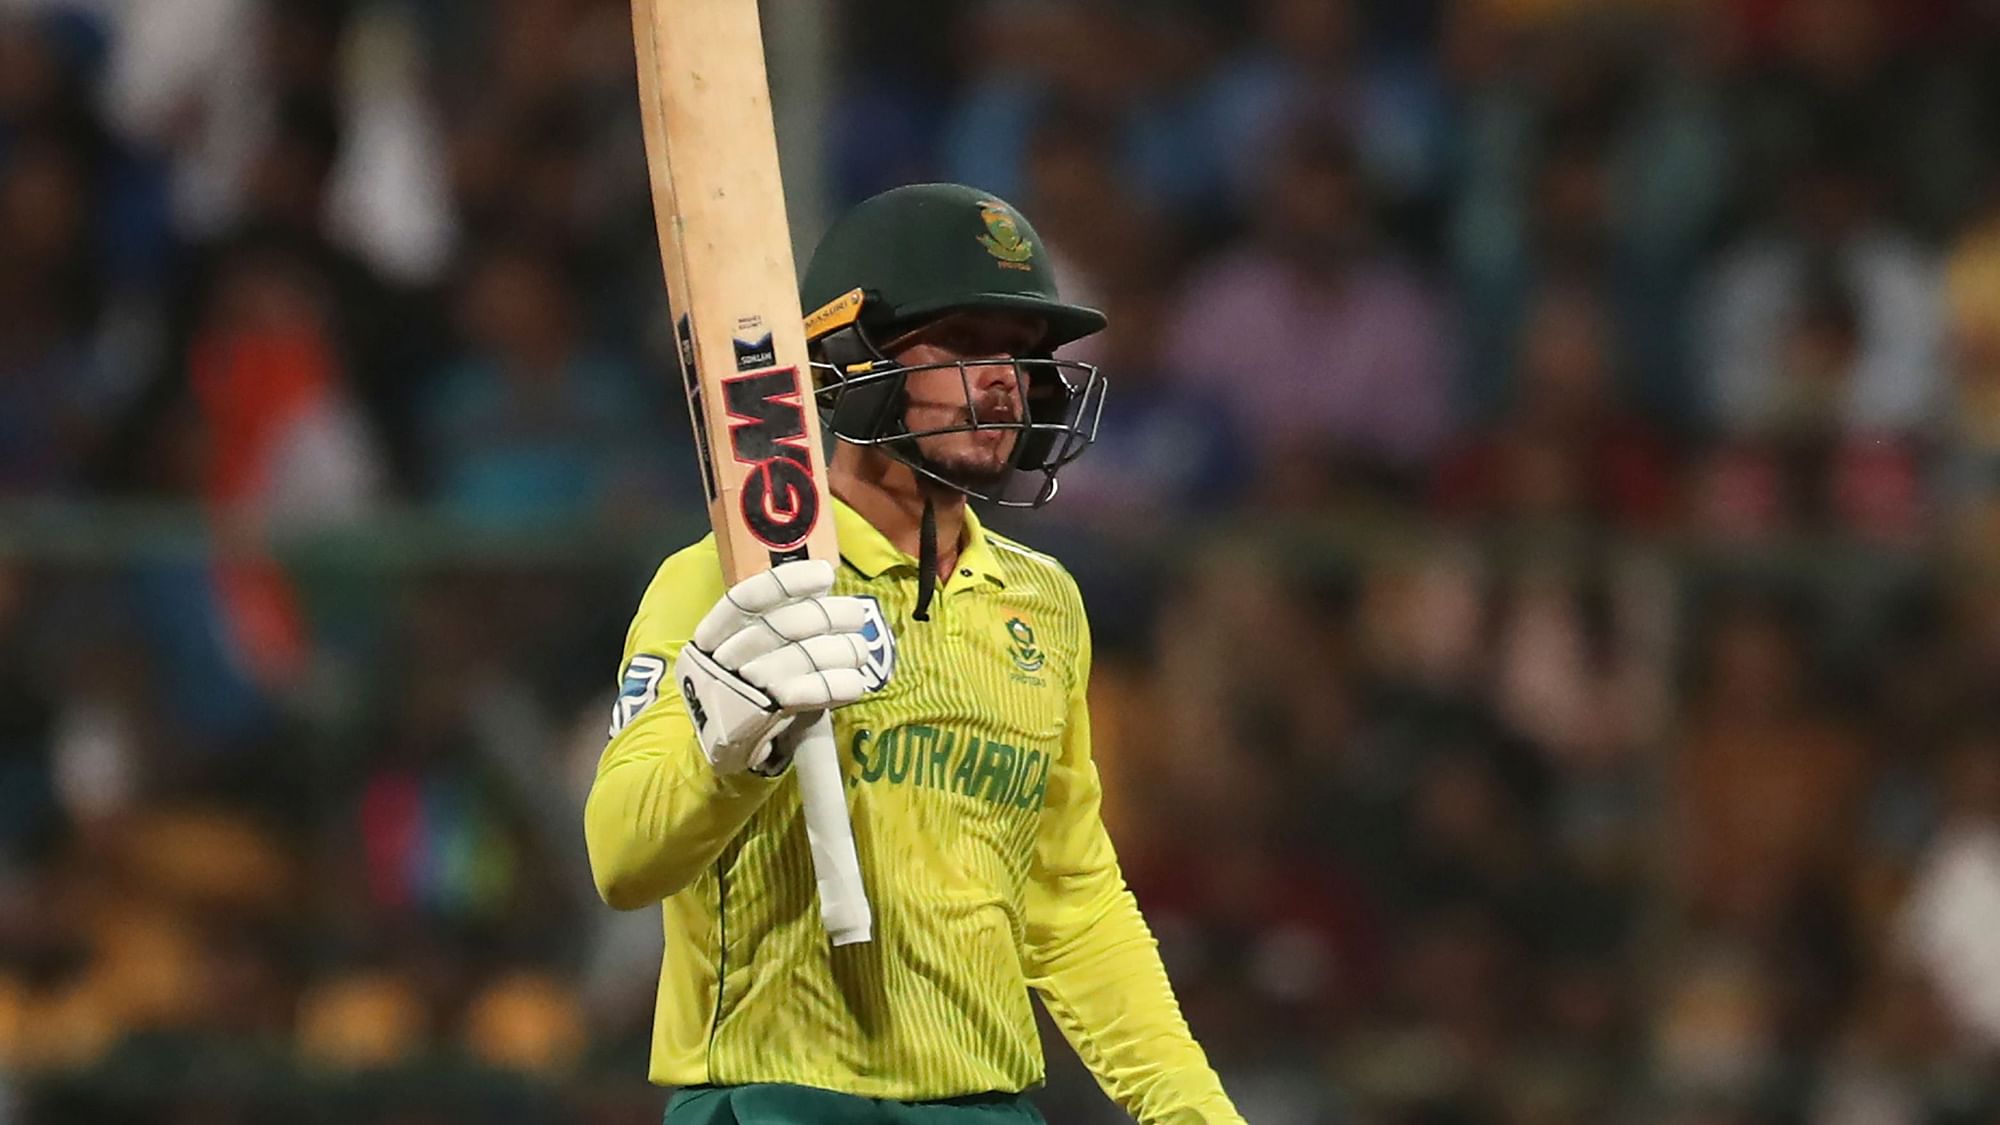 South Africa’s captain Quinton de Kock raises his bat to celebrate scoring fifty runs during the third and last T20 cricket match between India and South Africa in Bengaluru.